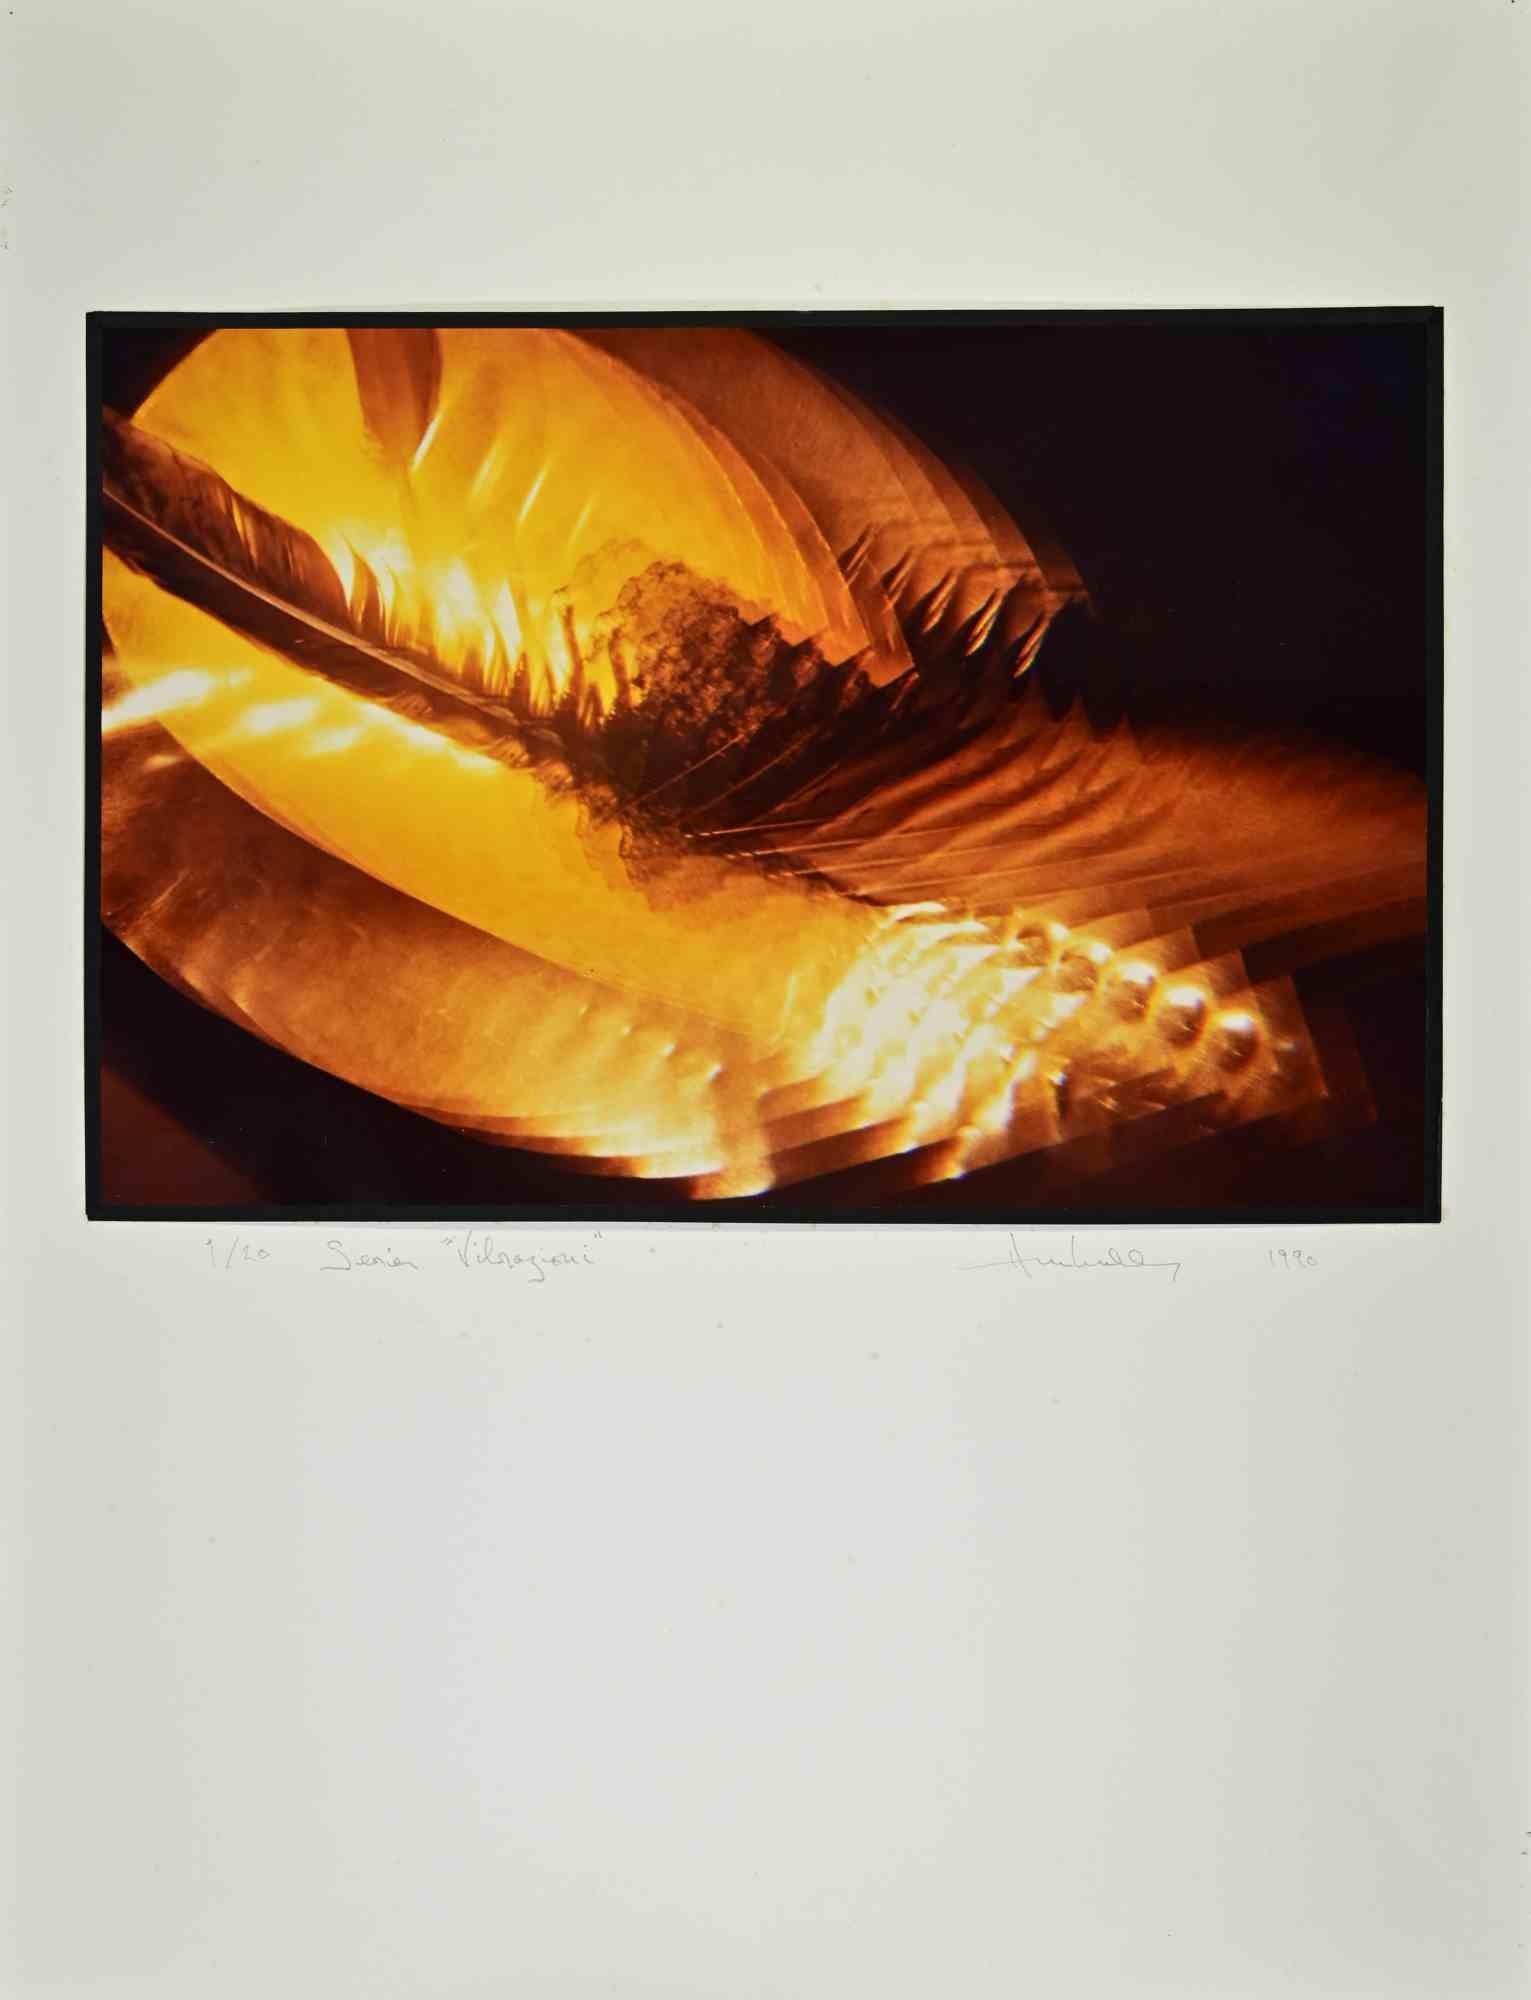 Exibition print from “ Vibrazioni”  is a vintage photographic print on color paper applied on cardboard realized by Harold Miller Null in 1990.

Hand signed and dated on the lower right margin.

Print performed for personal exposition in Ferrara